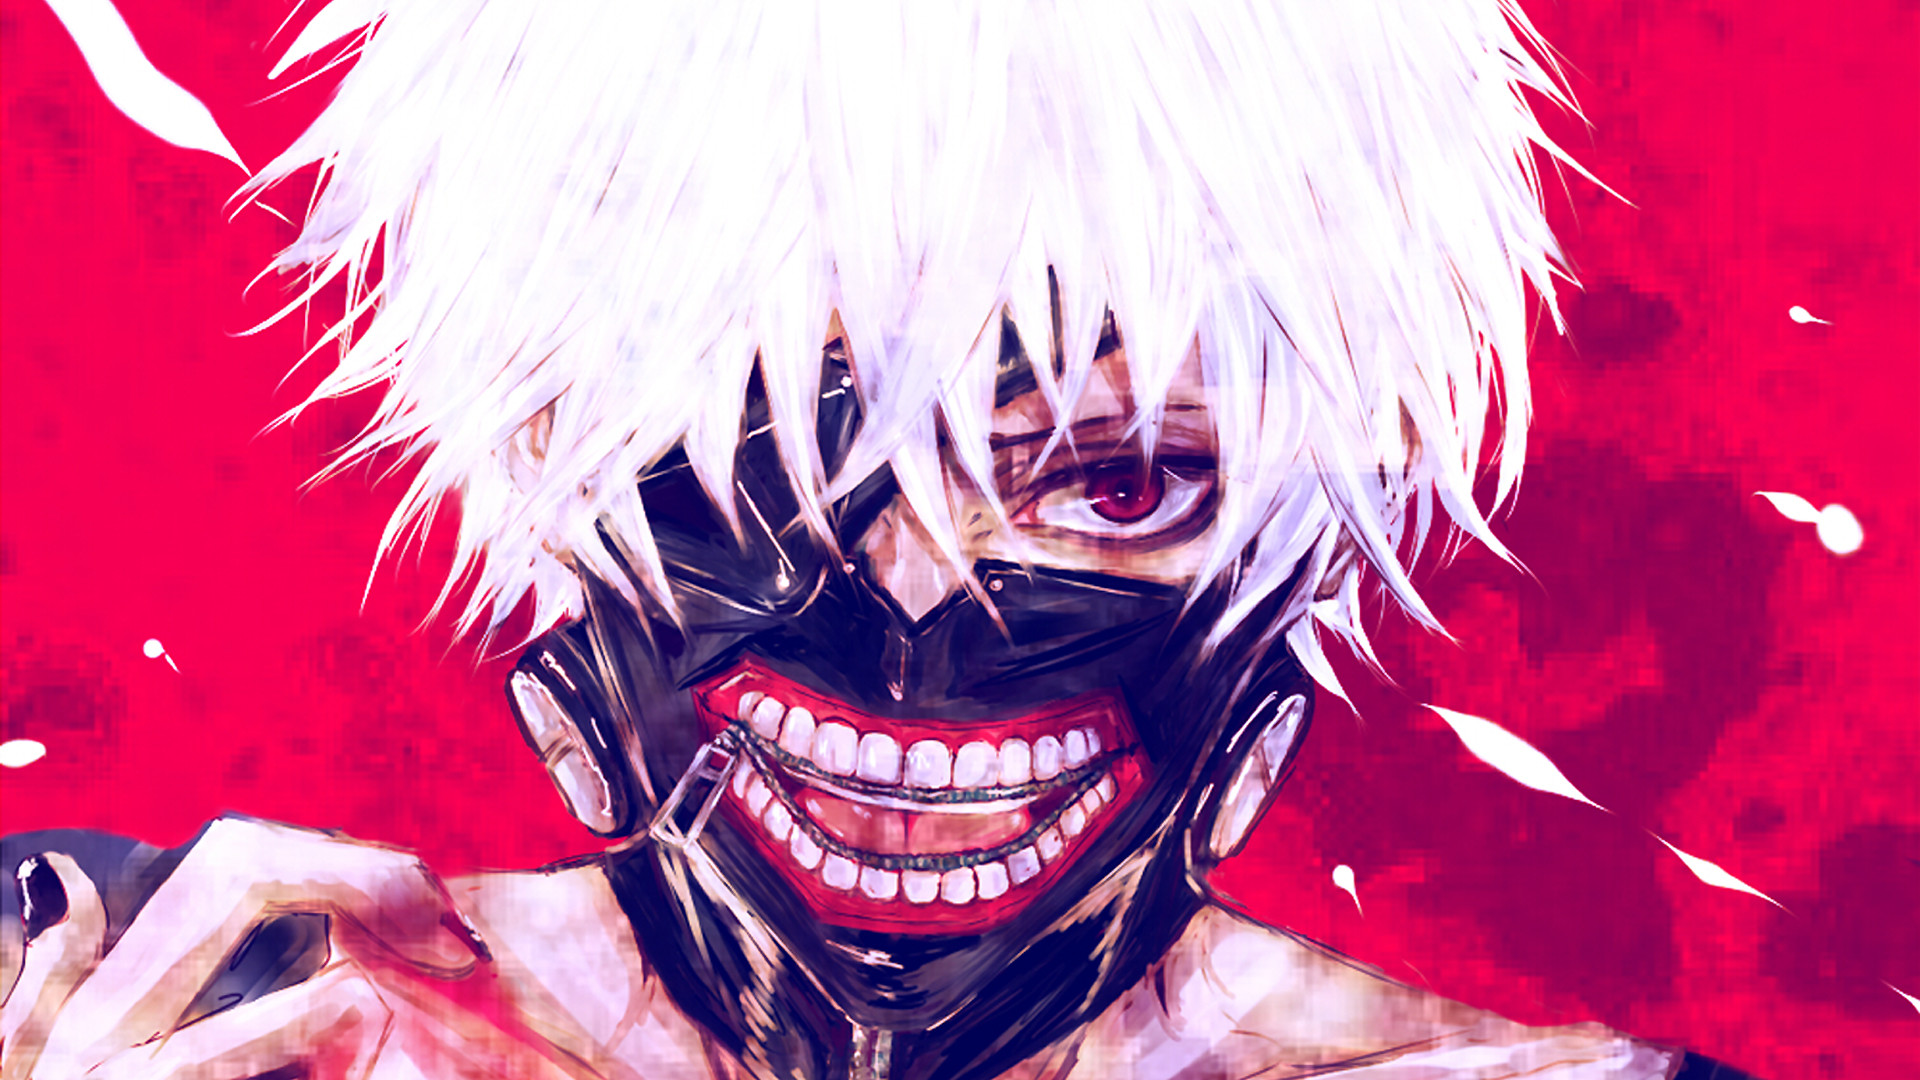 View, download, comment, and rate this Tokyo Ghoul Wallpaper – Wallpaper Abyss